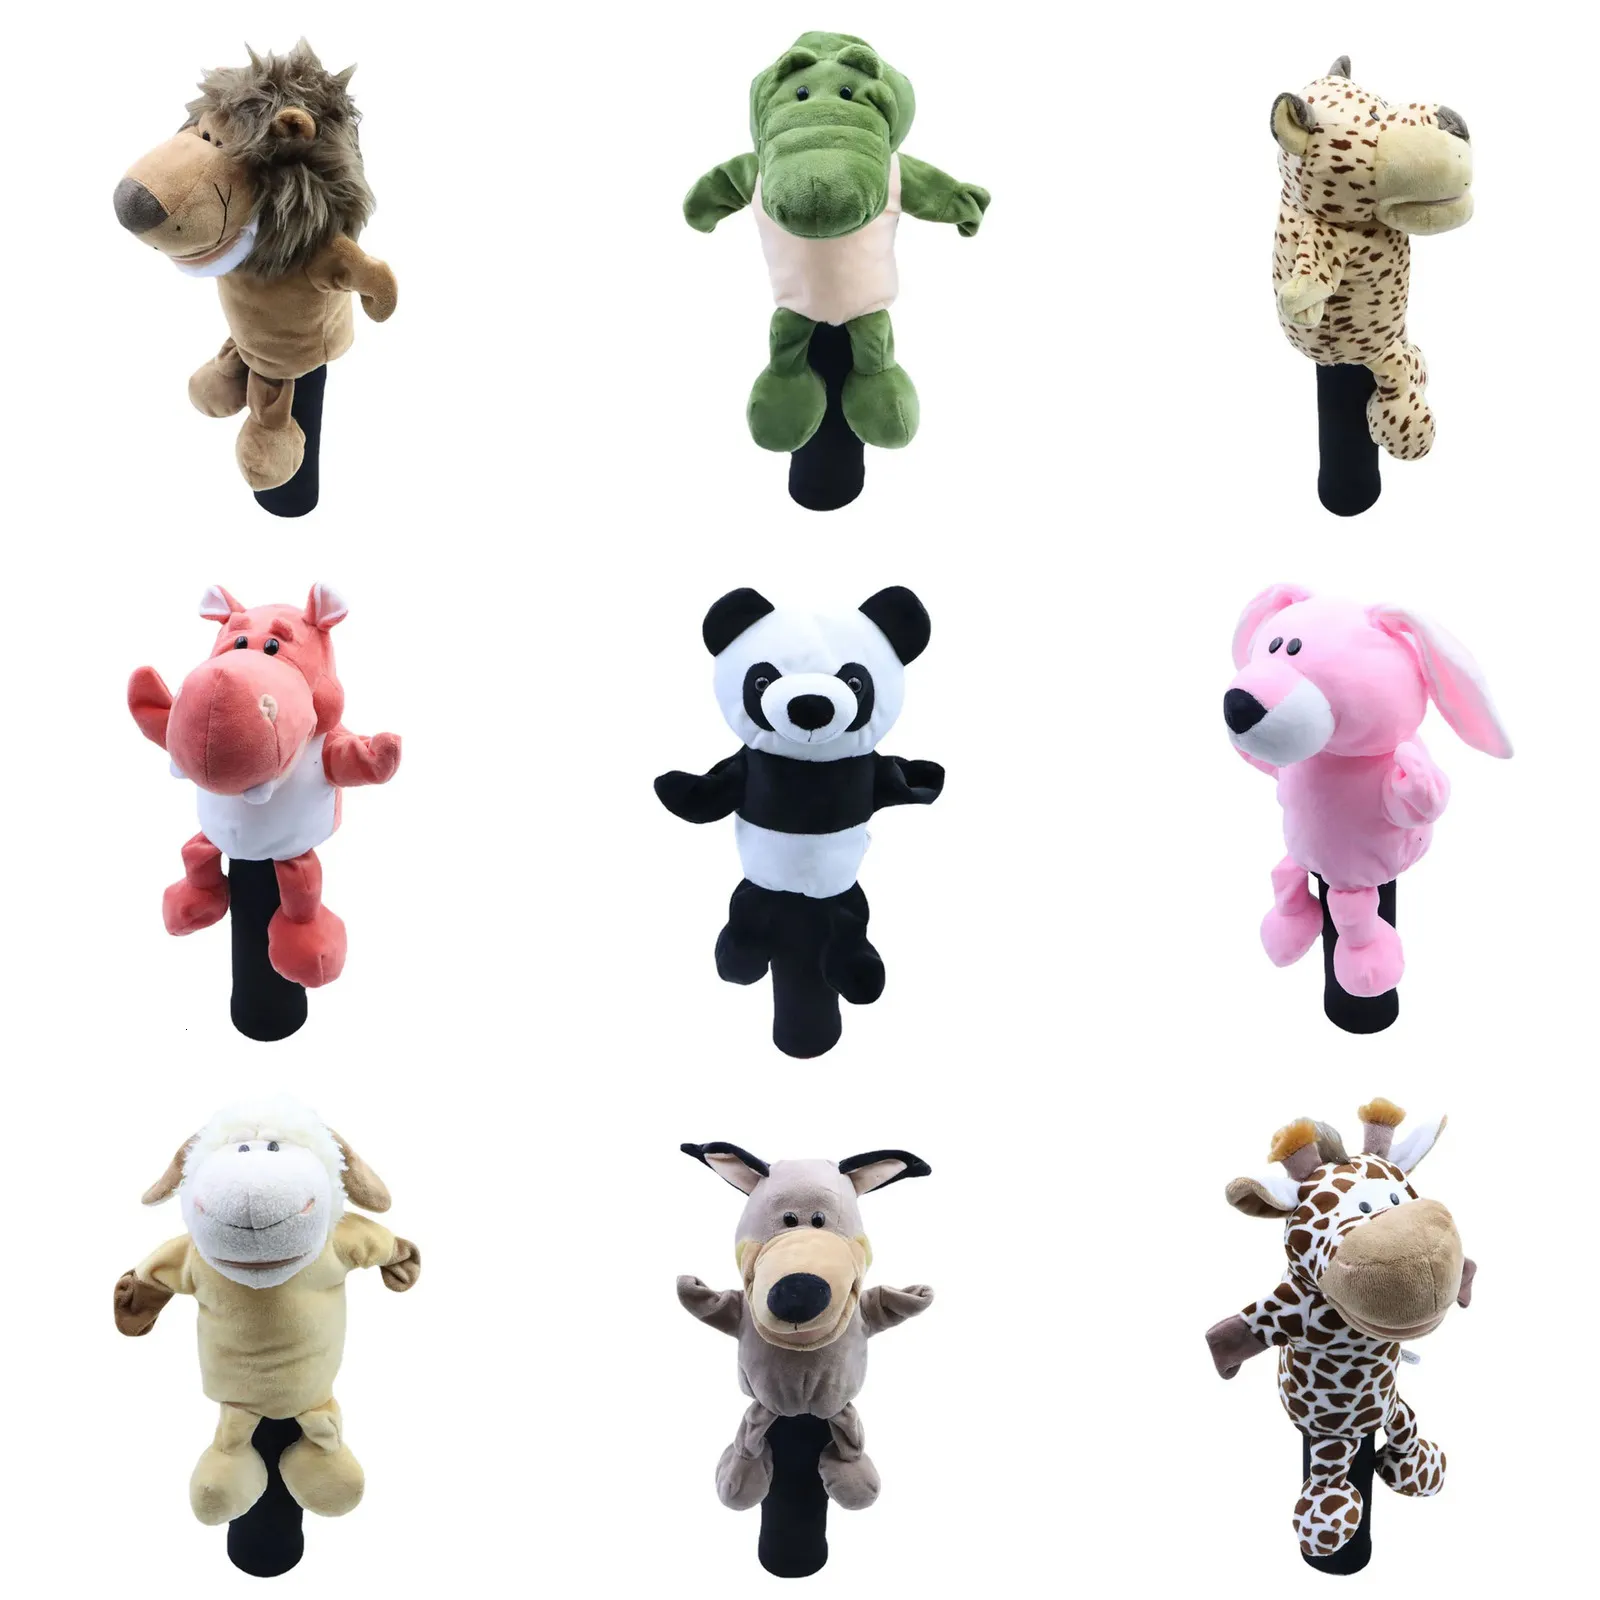 All kinds of Plush Animal Golf Head Covers Driver 0cc 1 Headcovers Protector Mascot Novelty Cute Gitfs 240428